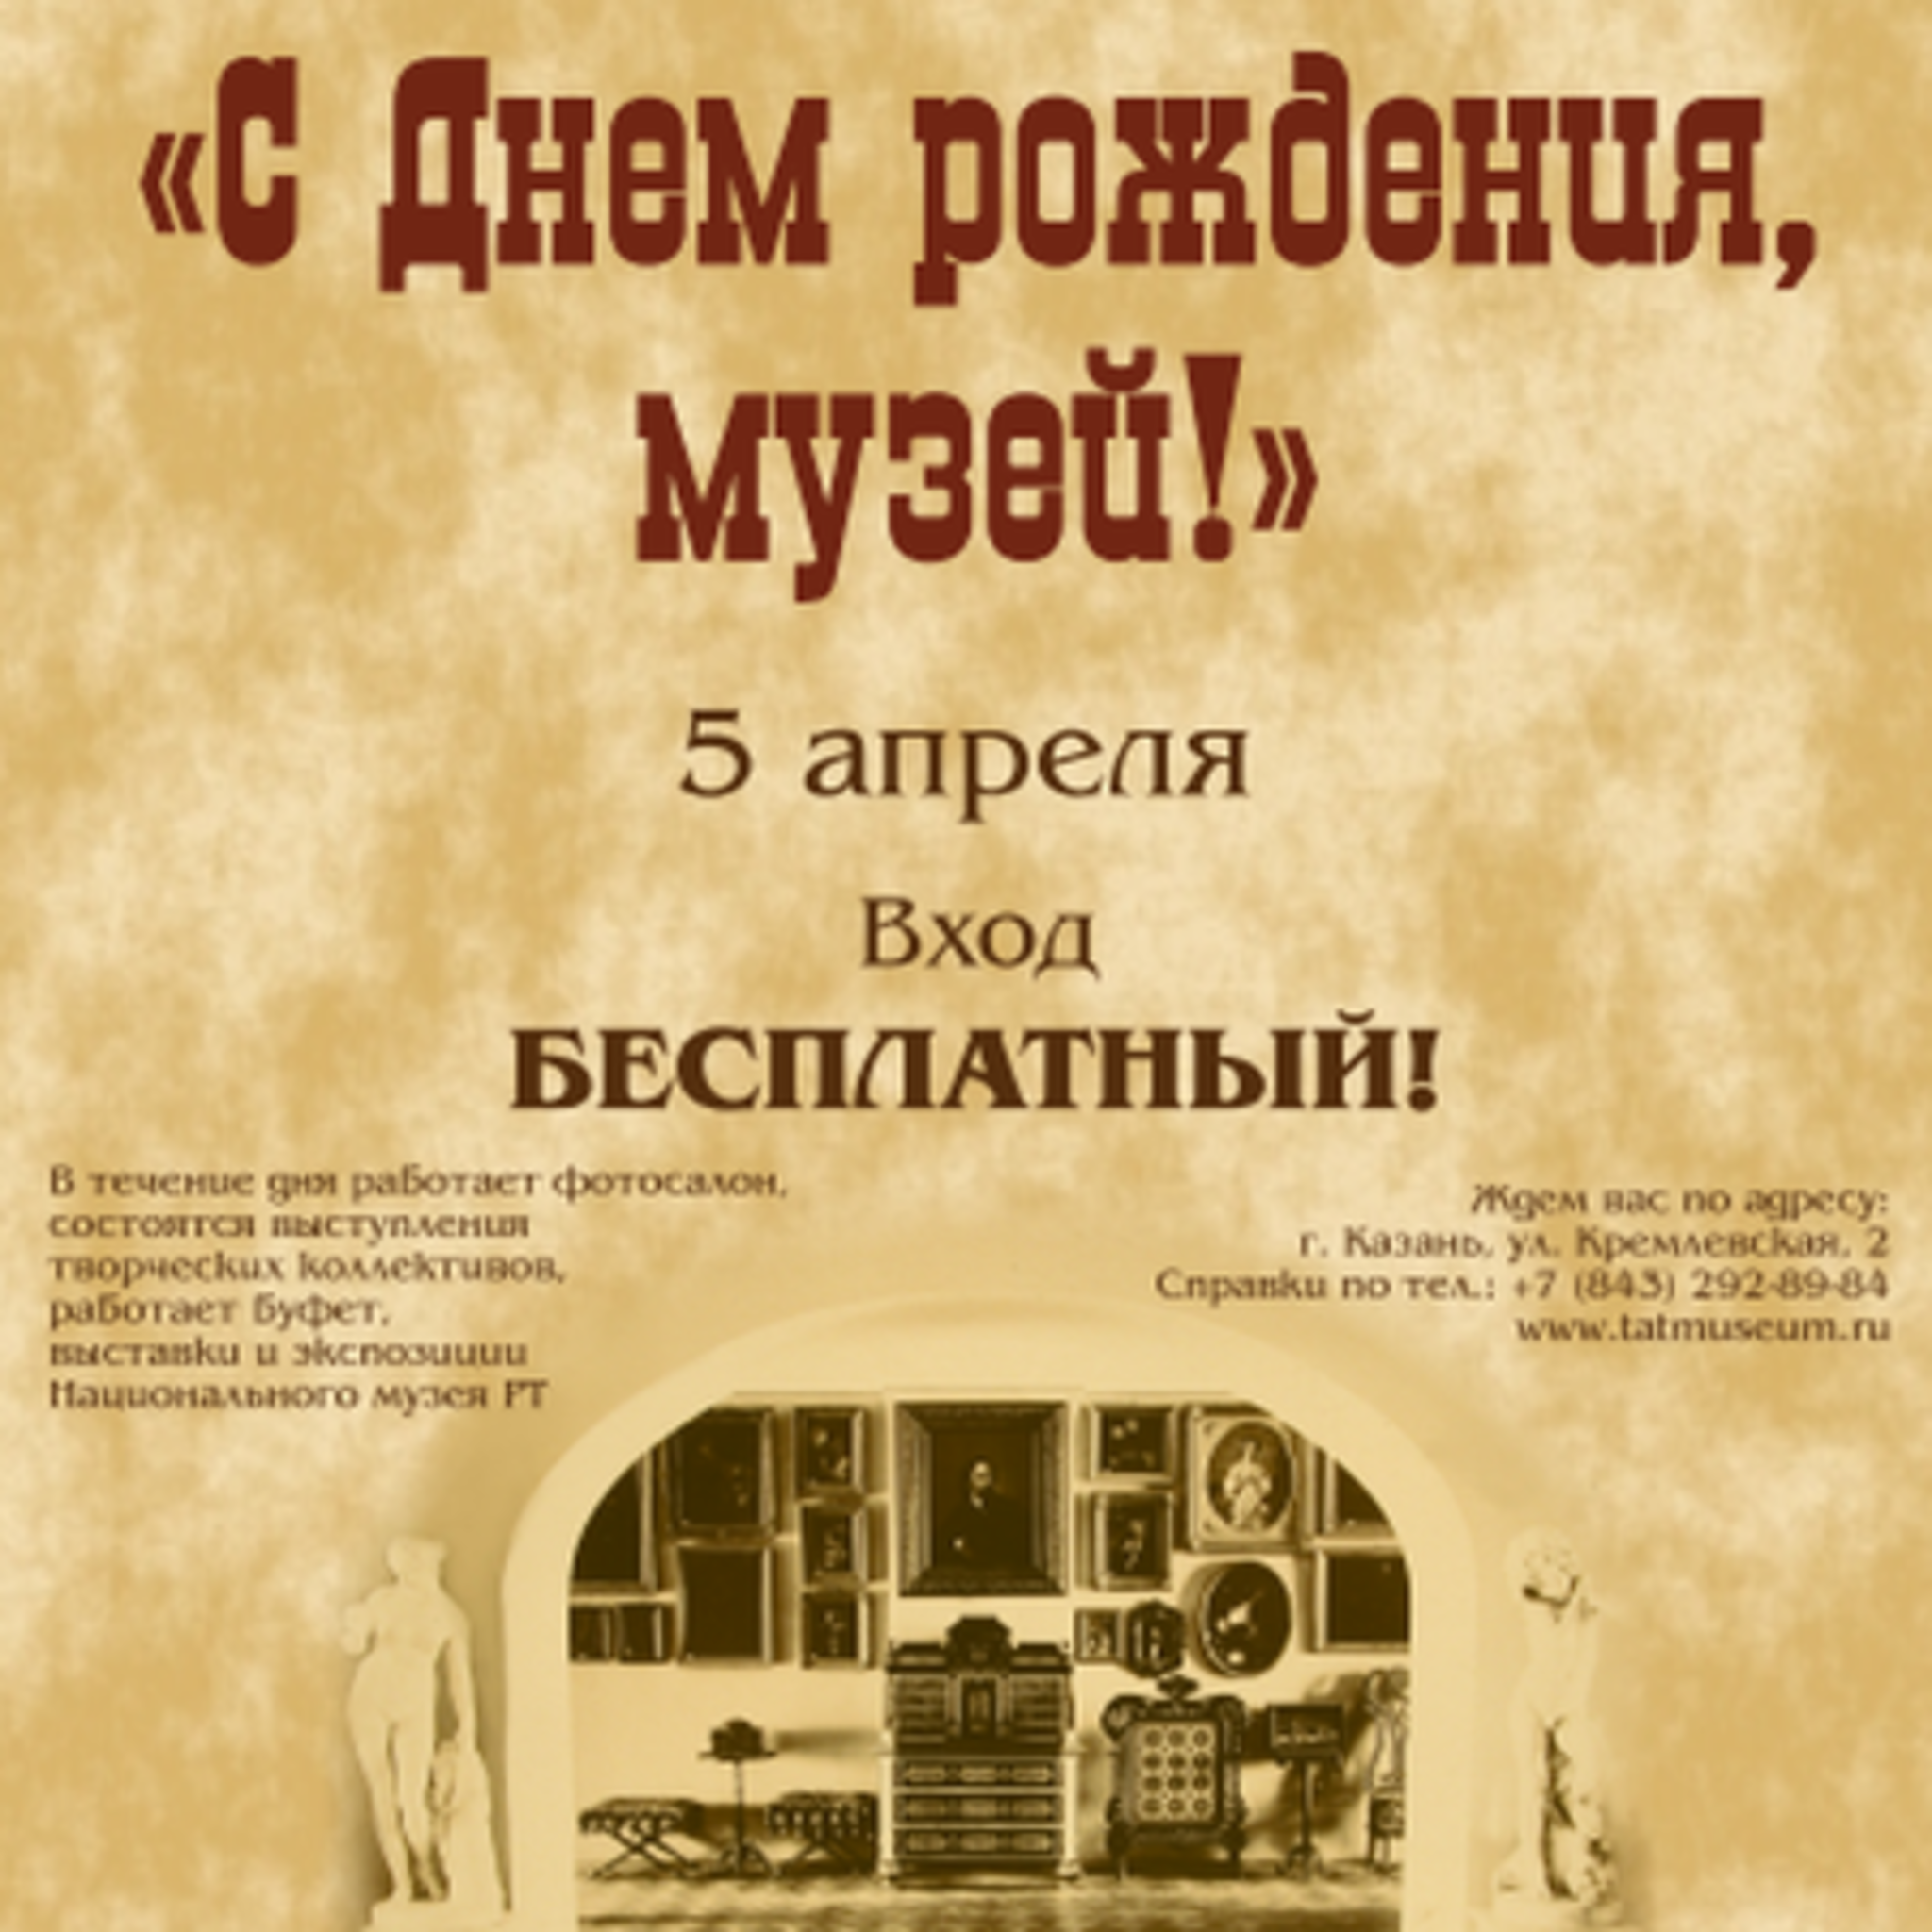 Birthday of the National Museum of the Republic of Tatarstan